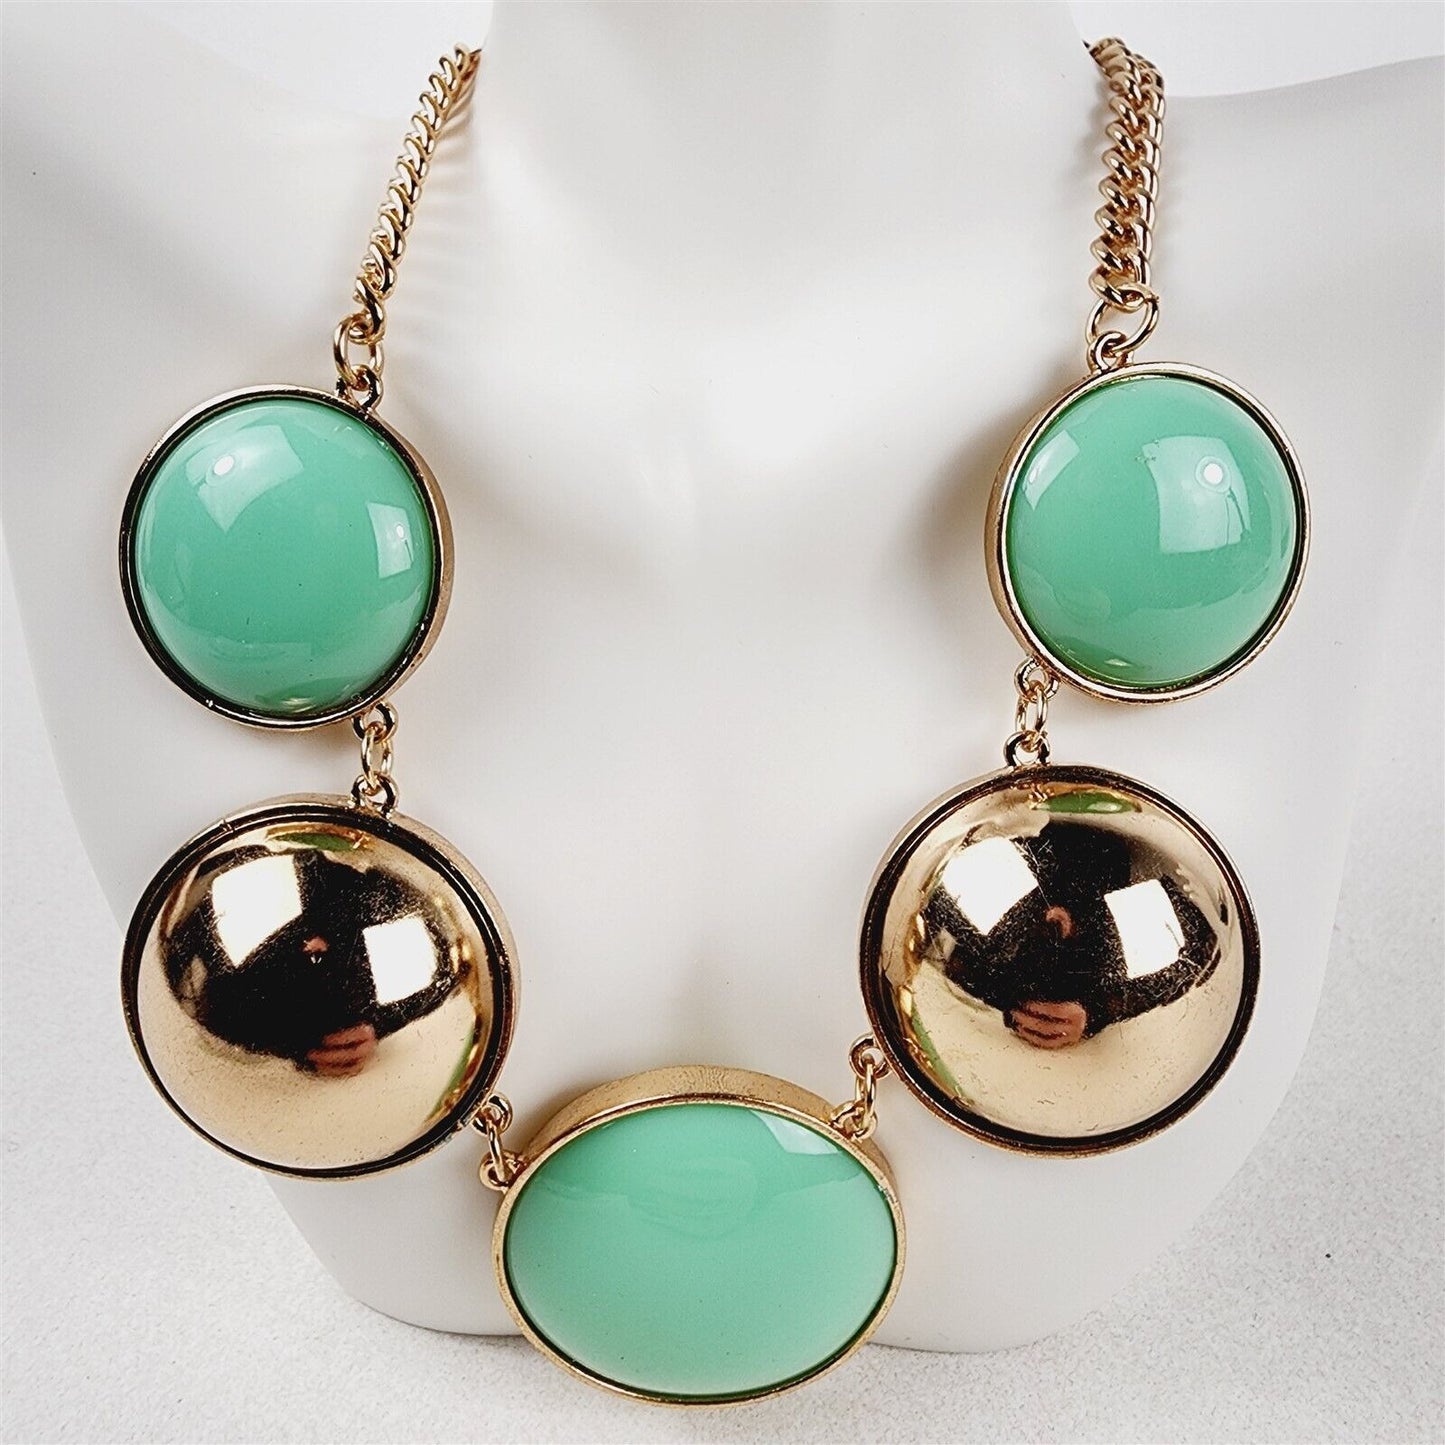 Gold & Mint Round Dome Necklace Earrings Fashion Jewelry Set